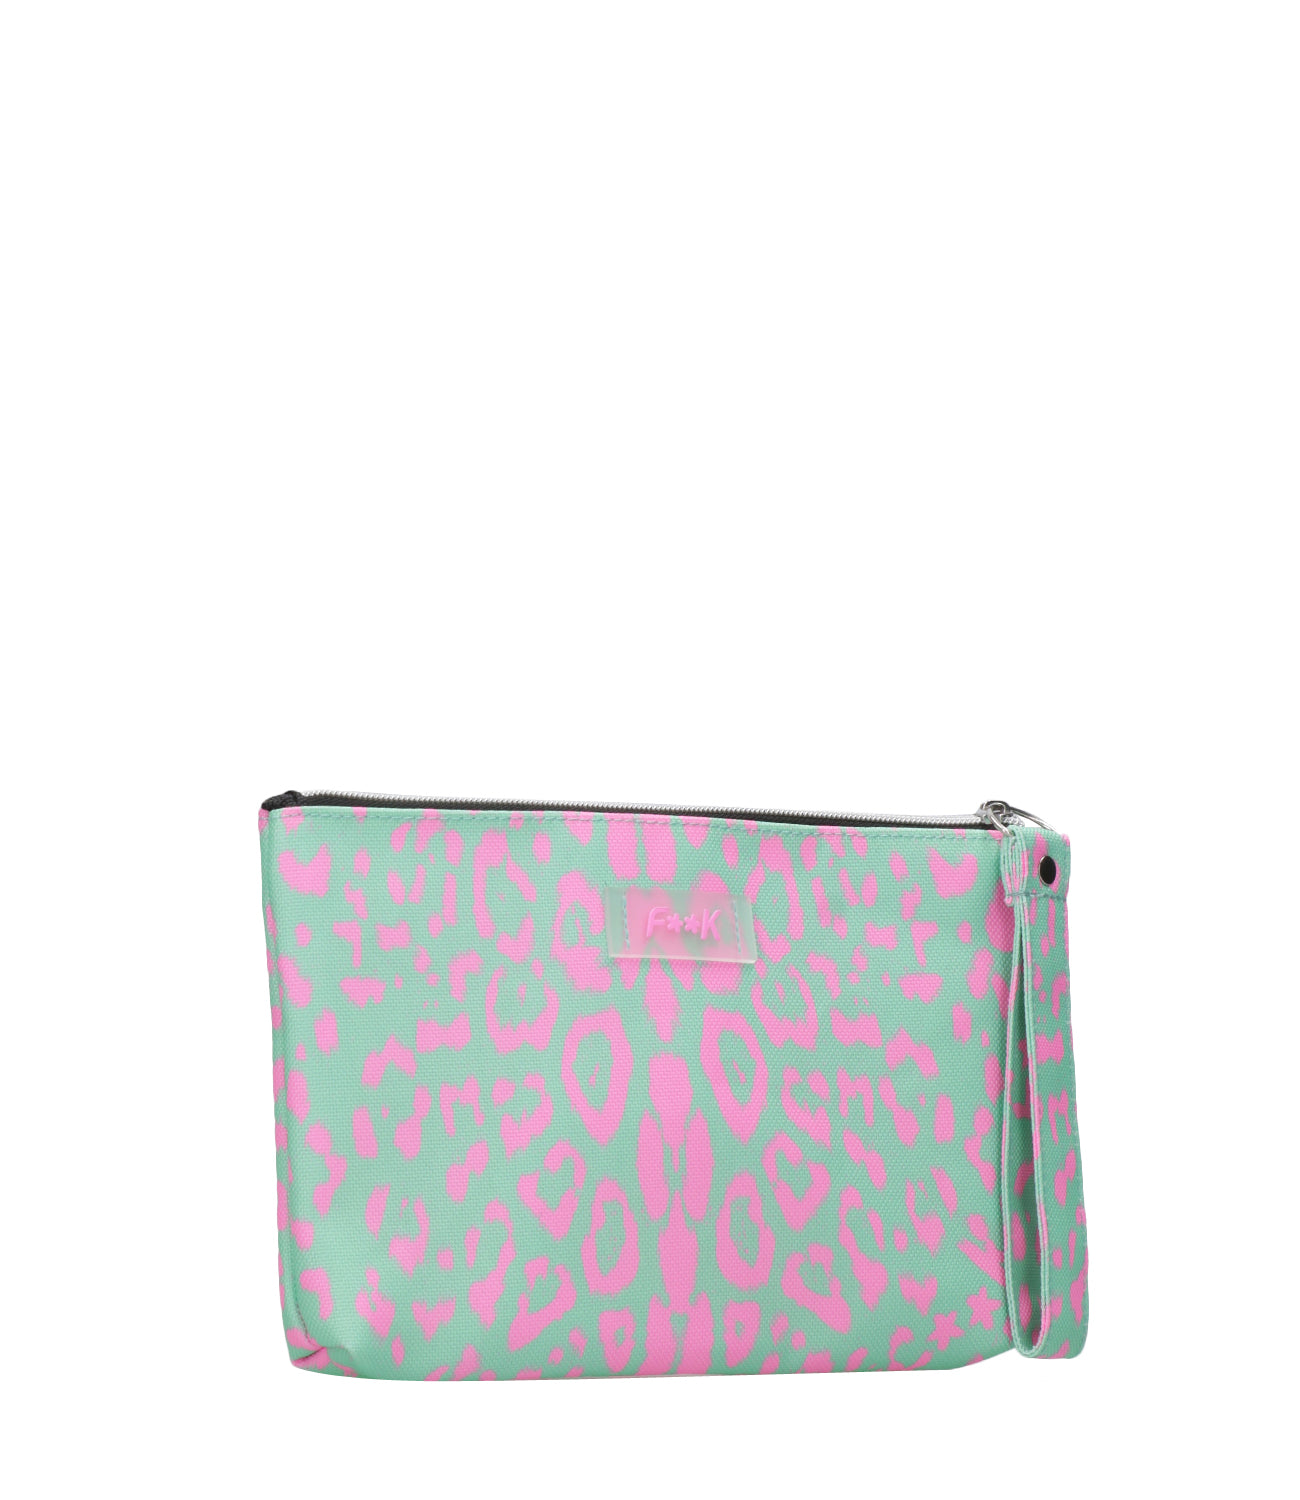 F**K Project | Water Green and Pink Mini Clutch Bag